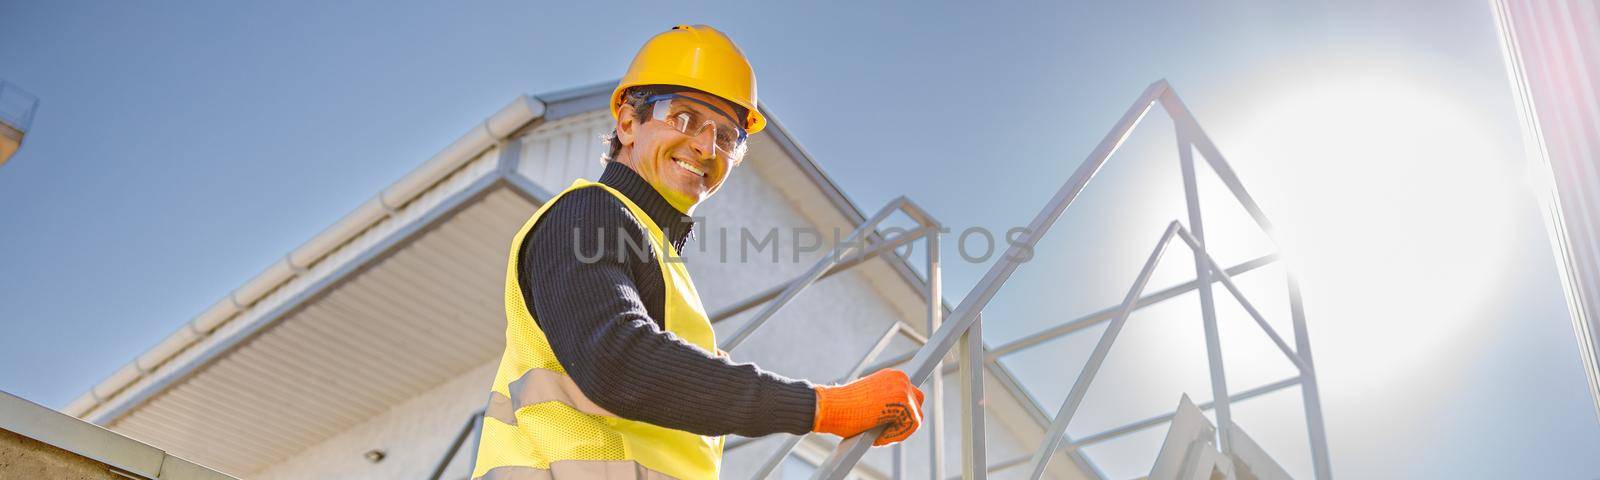 Joyful matured man in safety helmet looking at camera and smiling while walking up staircase at industrial plant